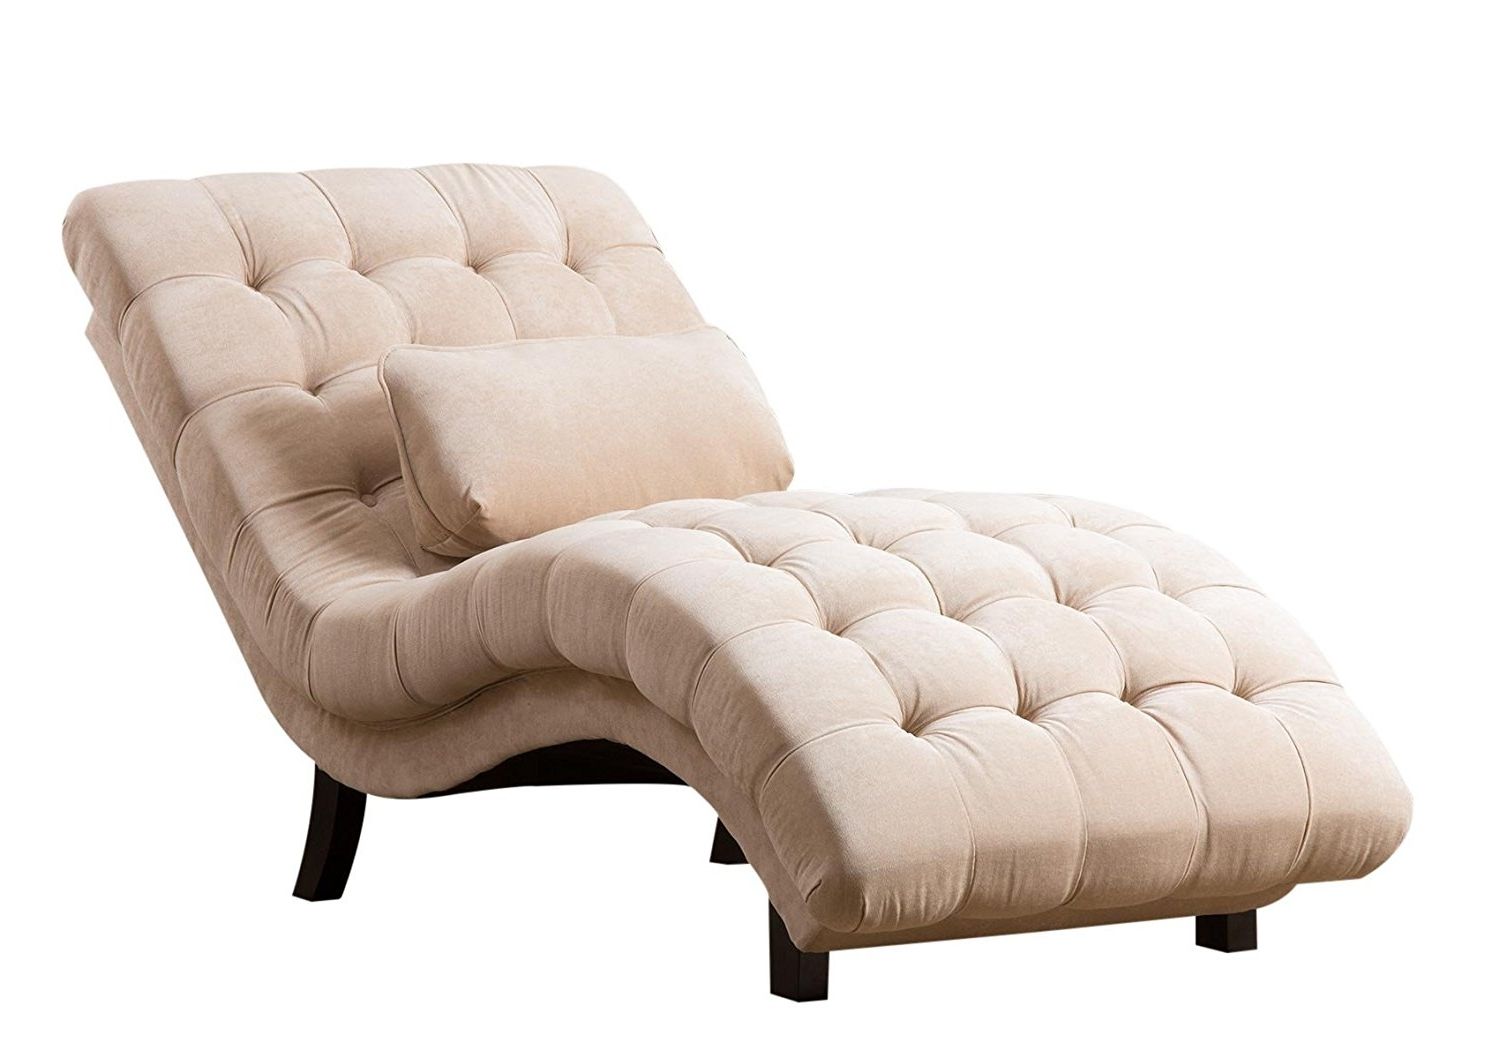 Amazon: Abbyson Carmen Cream Fabric Chaise: Home & Kitchen Within Well Known Tufted Chaises (View 10 of 15)